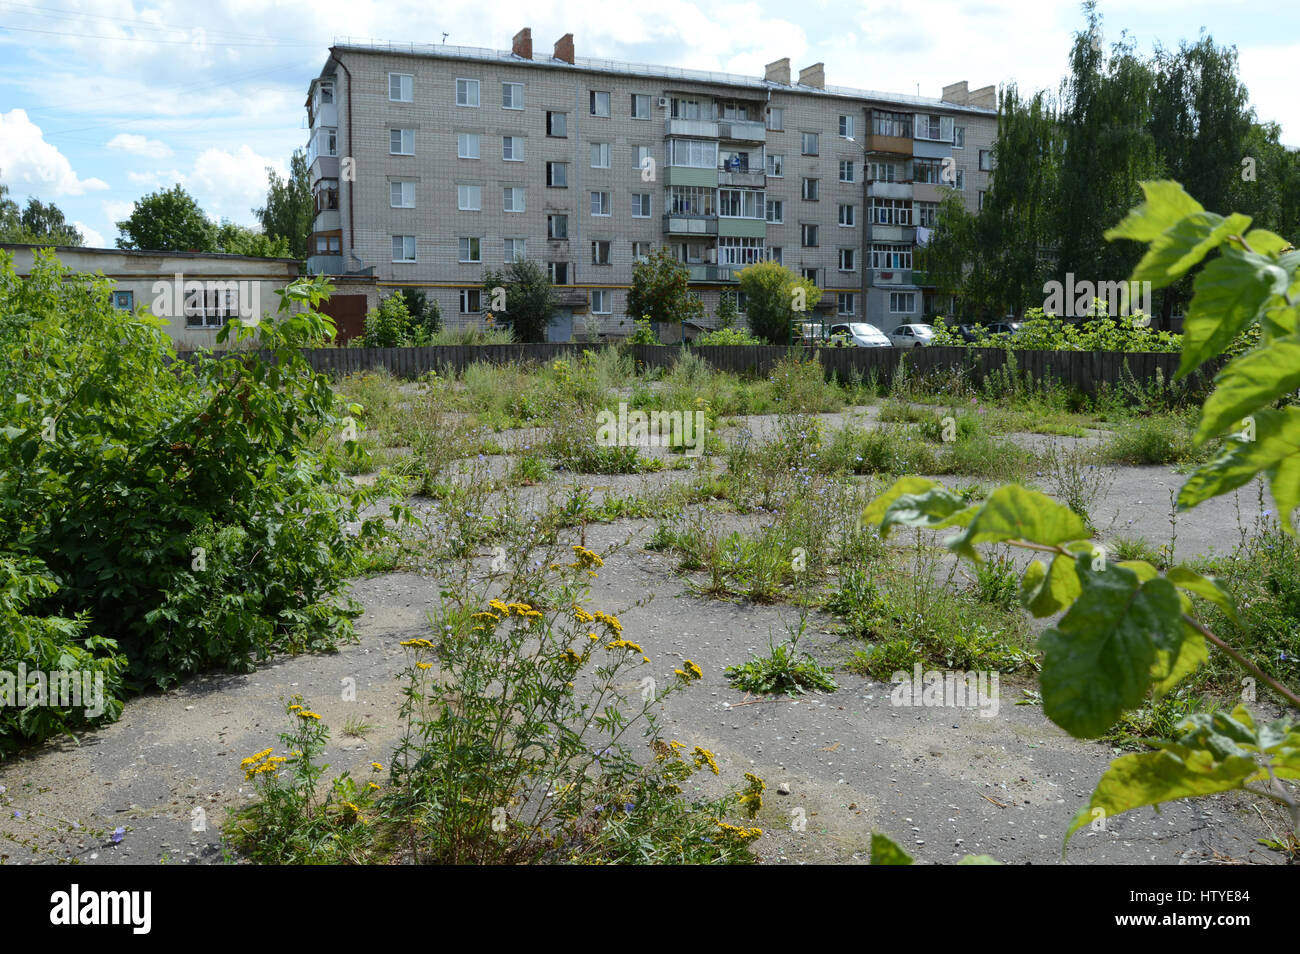 KOVROV, RUSSIA - July 30, 2015: Overgrown grass and bushes hockey playground in the yard of a multistory building Stock Photo